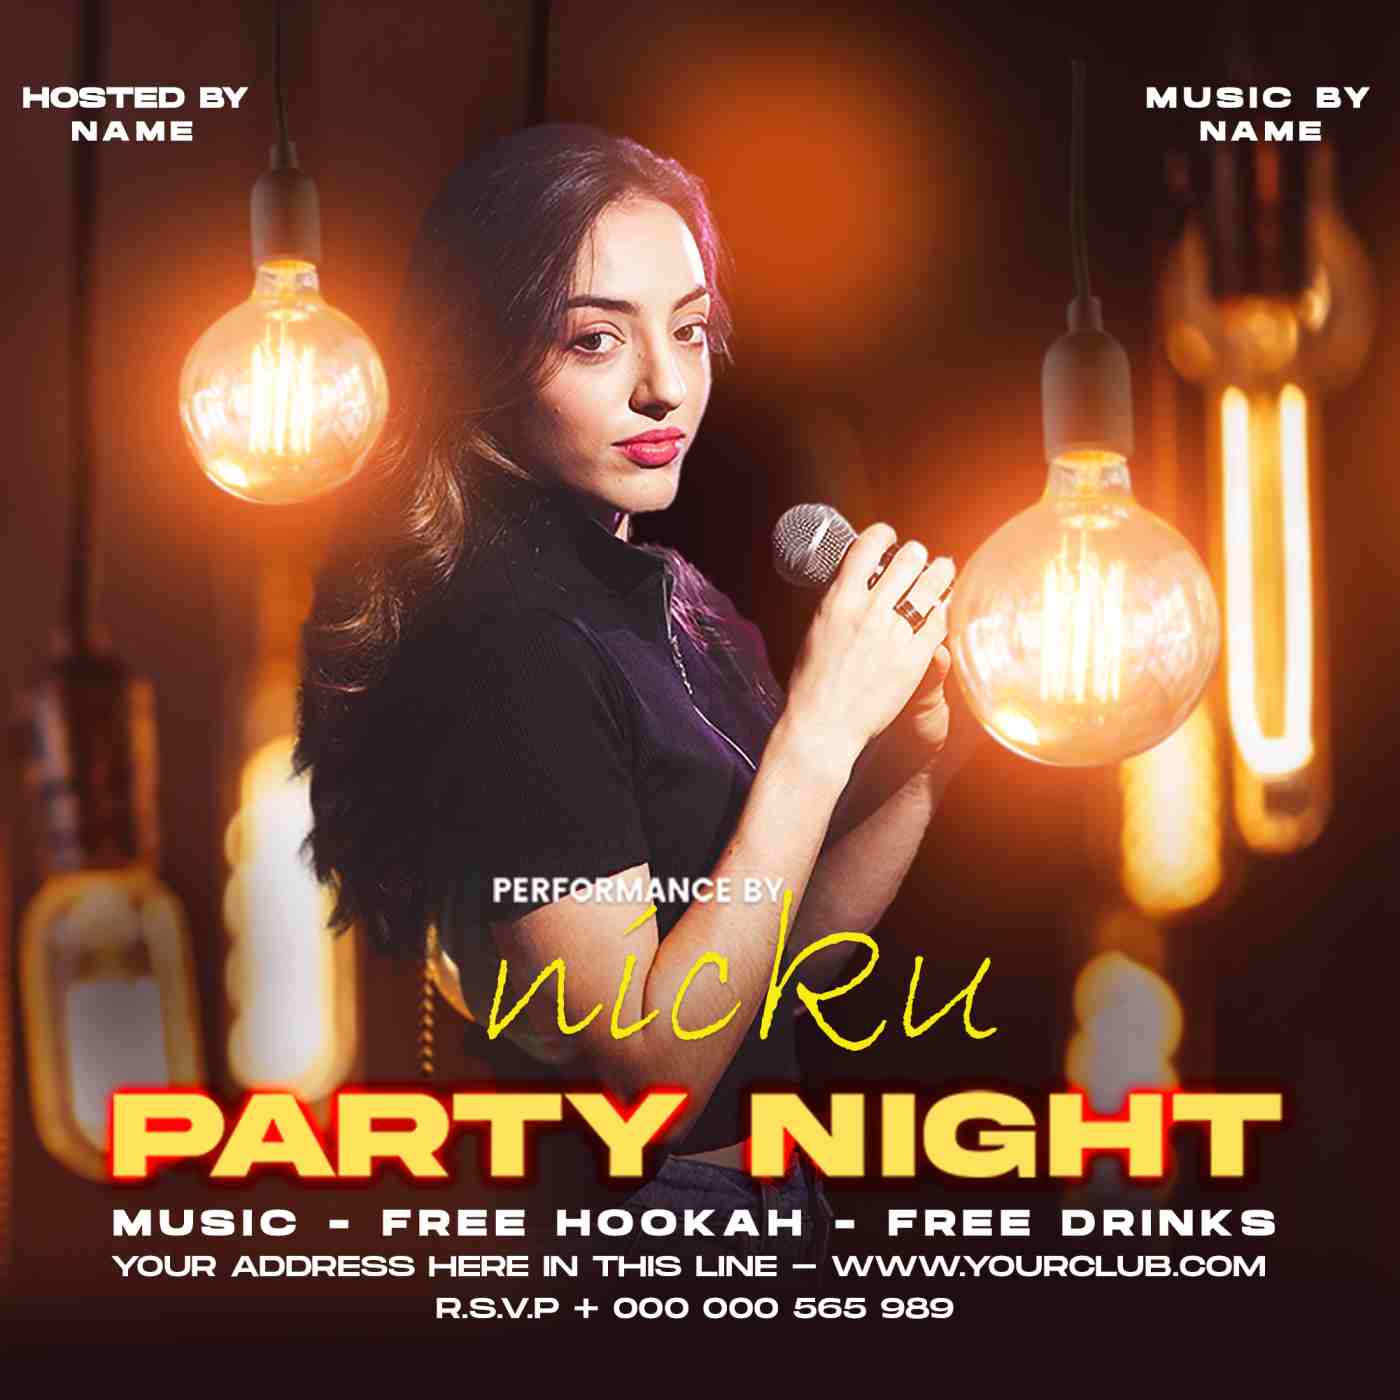 DJ Party Social Media Template cover image.